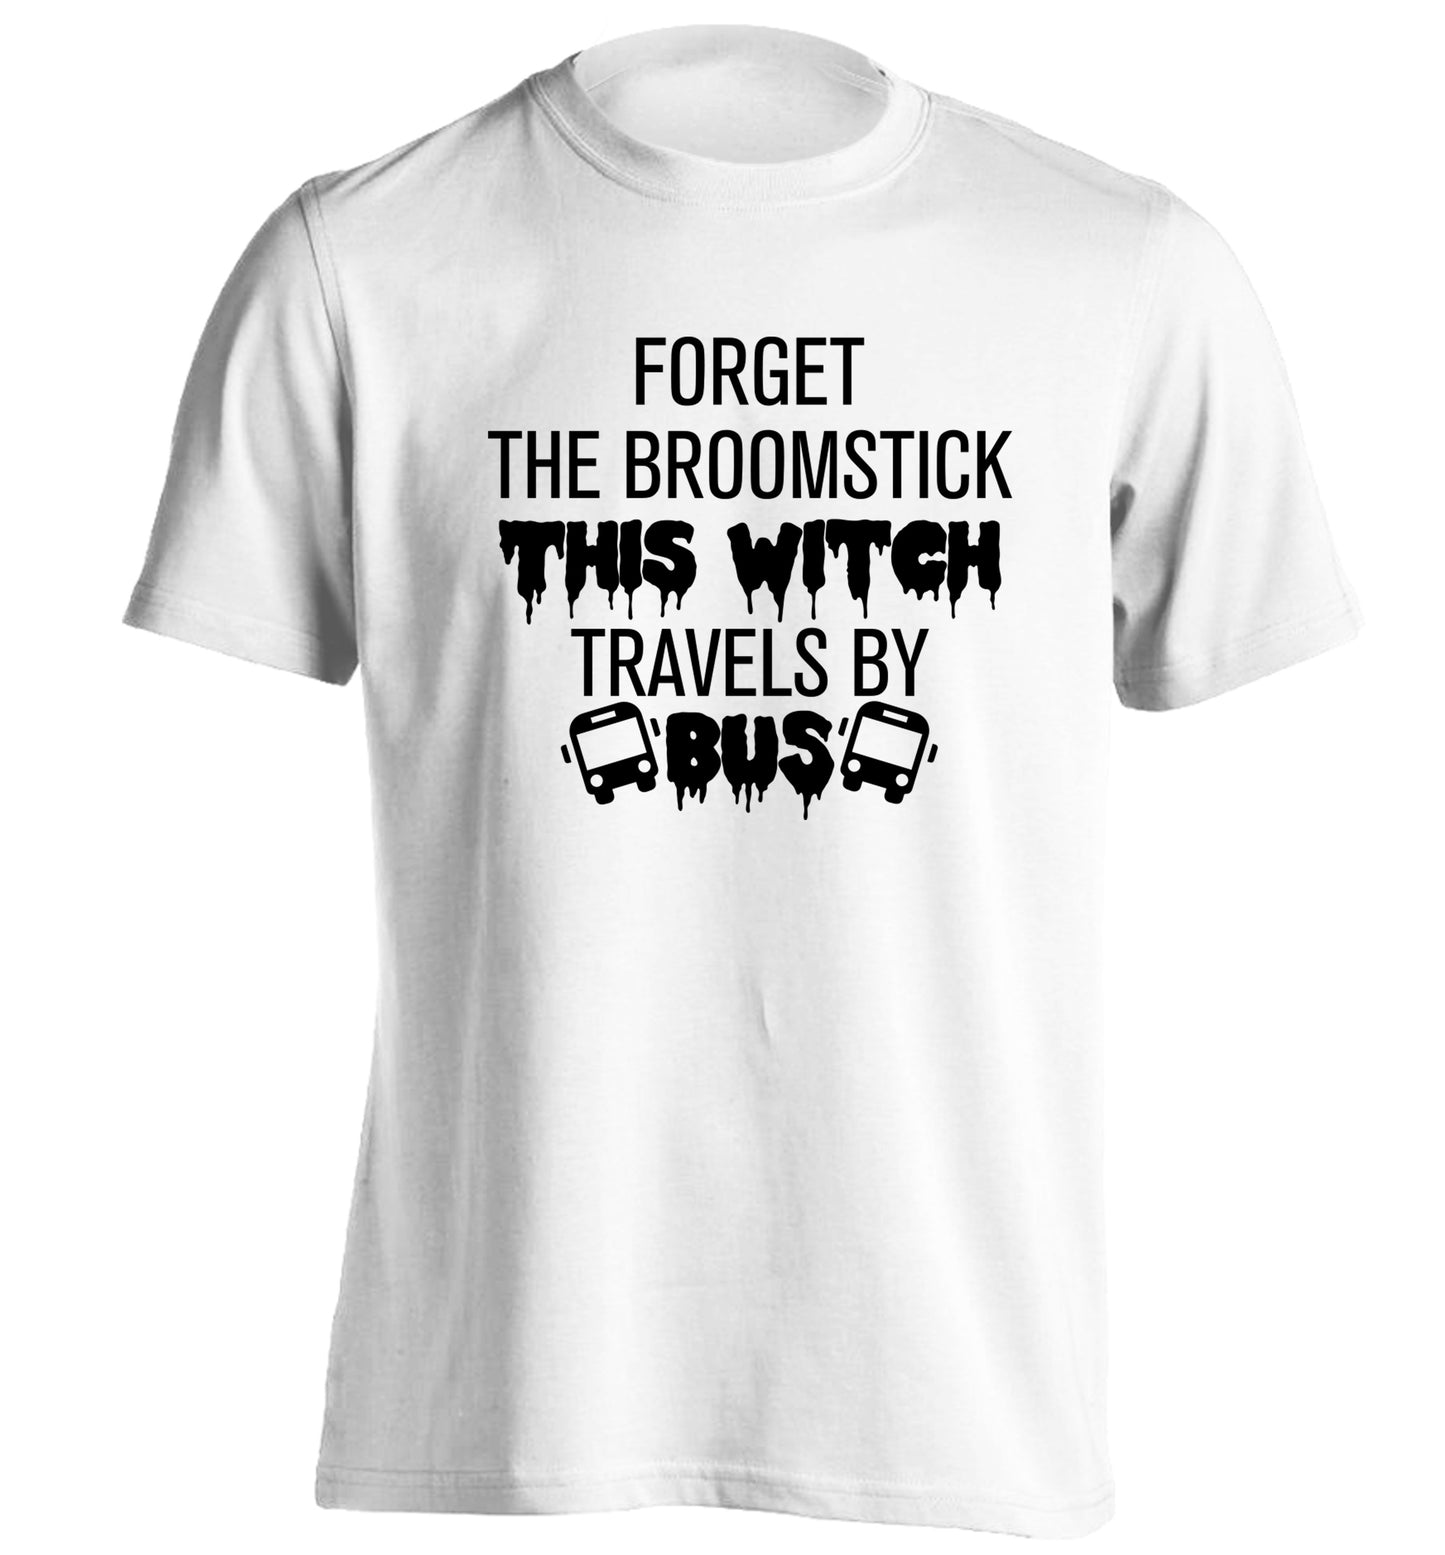 Forget the broomstick this witch travels by bus adults unisexwhite Tshirt 2XL